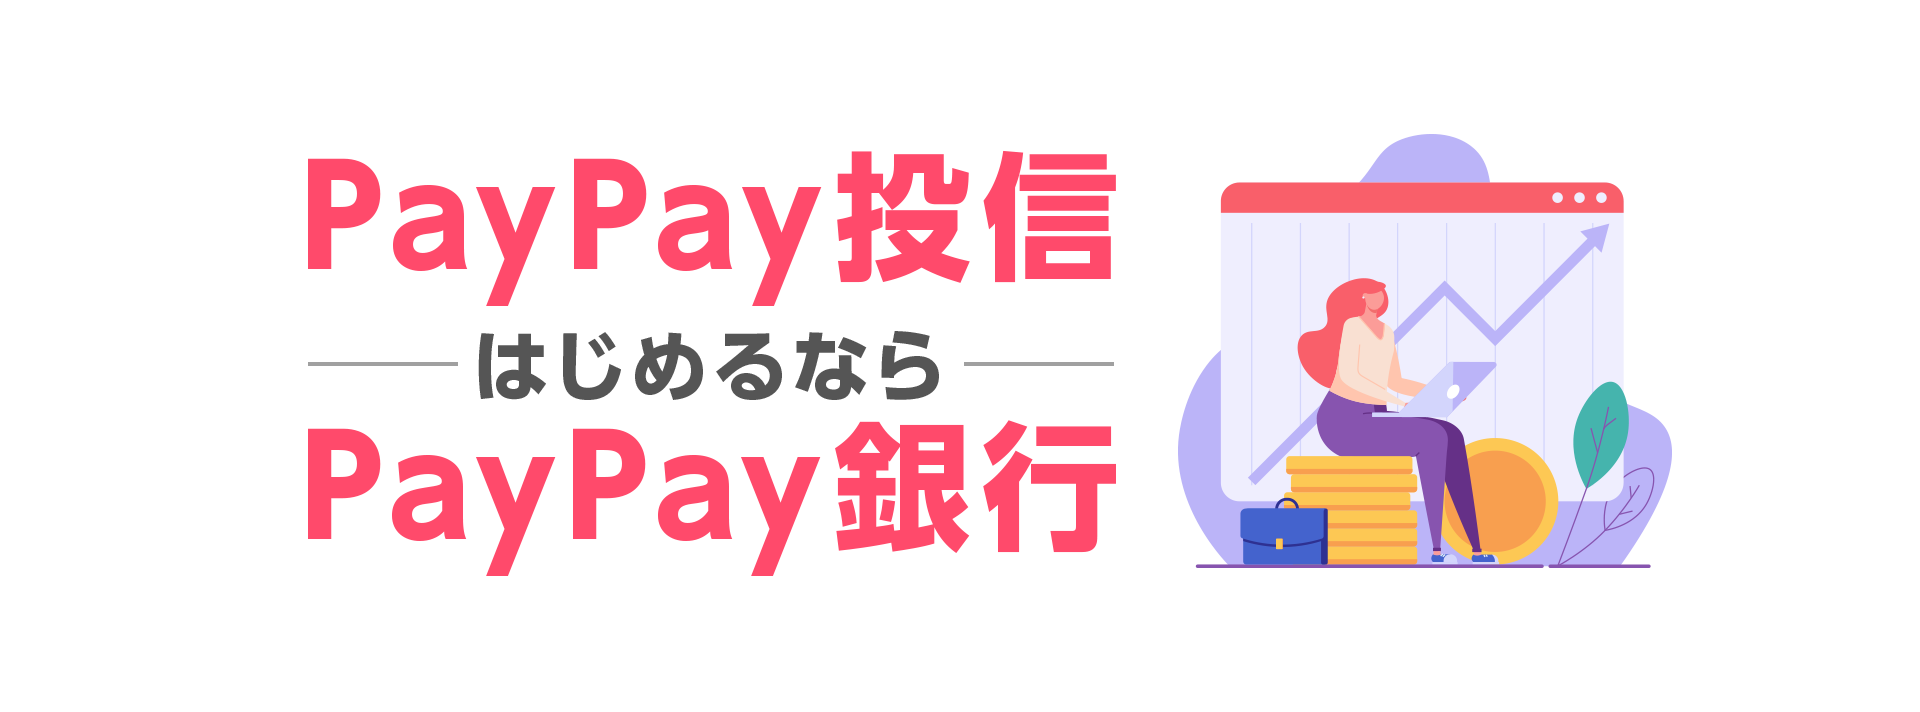 PayPay投信はじめるならPayPay銀行